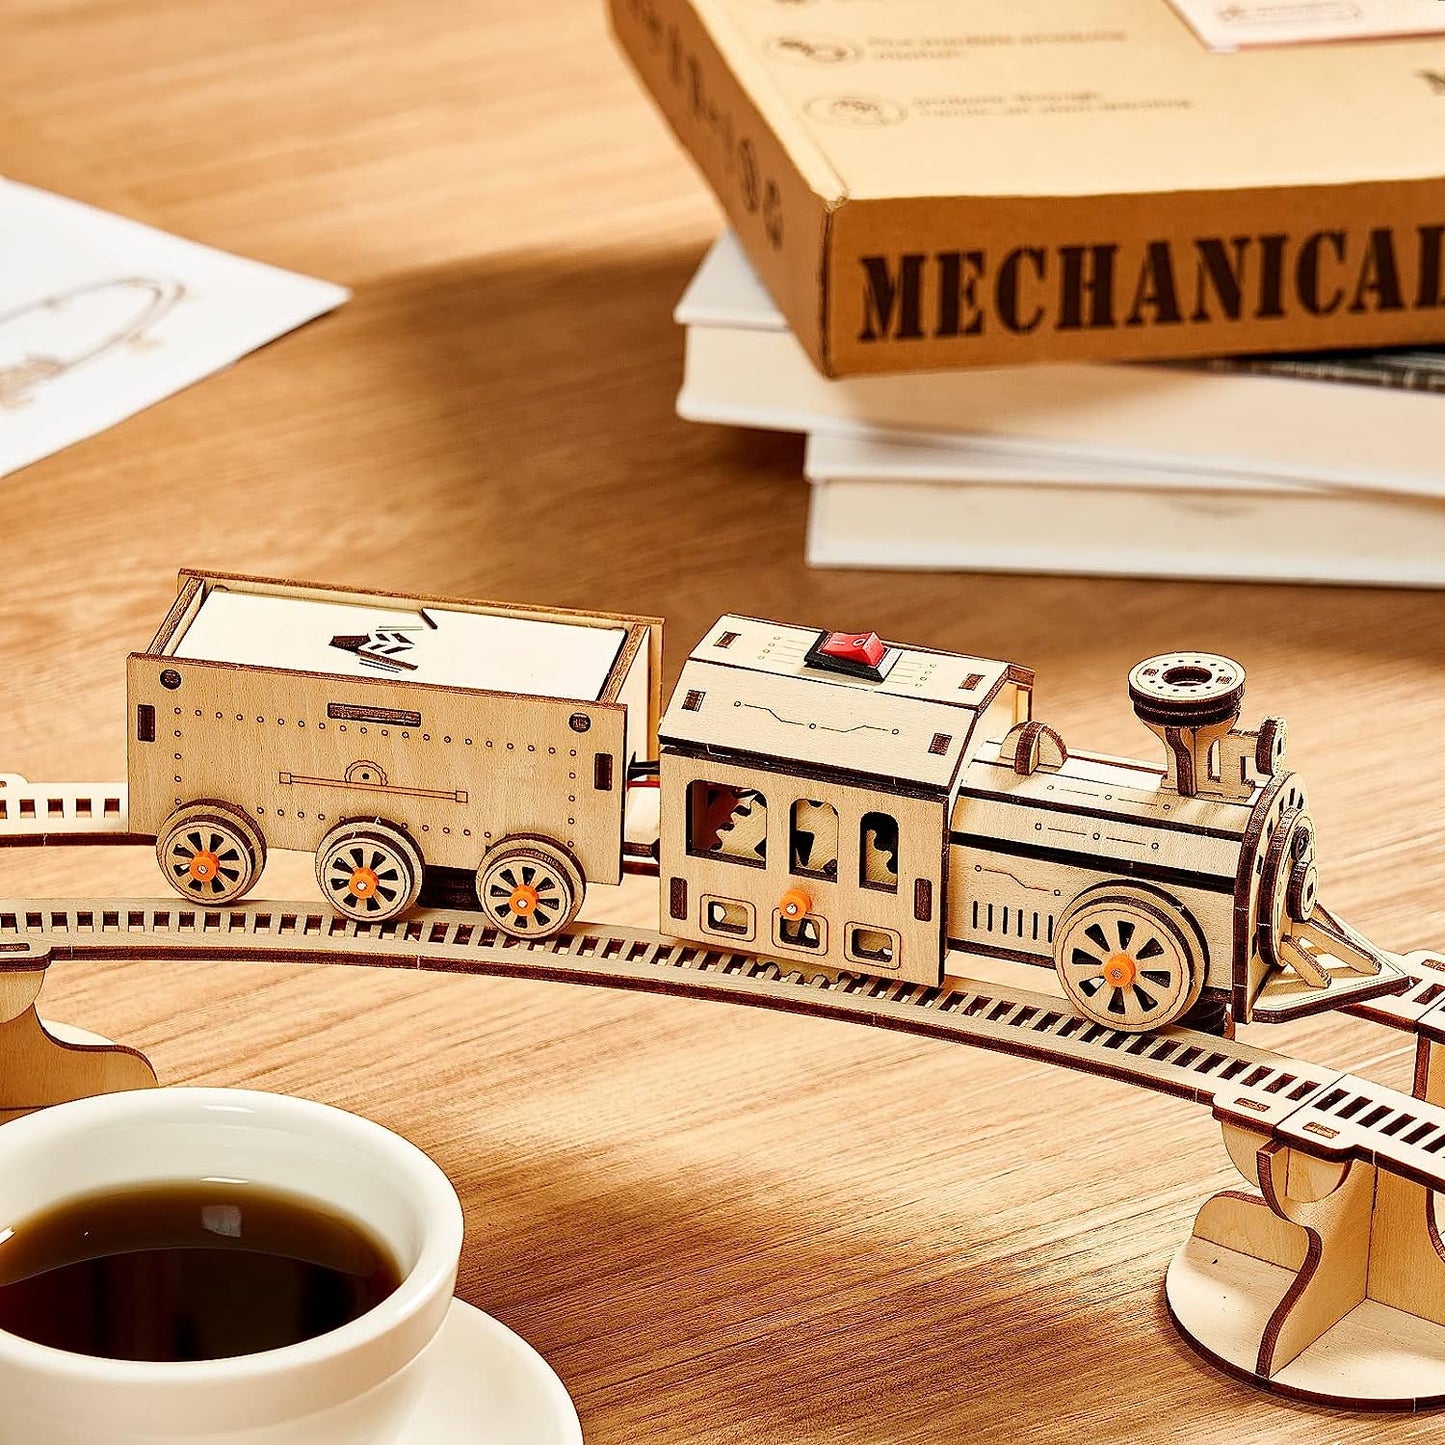 3D Wooden Puzzles Little Truck Train Model Kits Includes Engine & Track, Brainteaser and Puzzle for Chris as/Birthday,Gifts for Adults and Teens to Build Combination